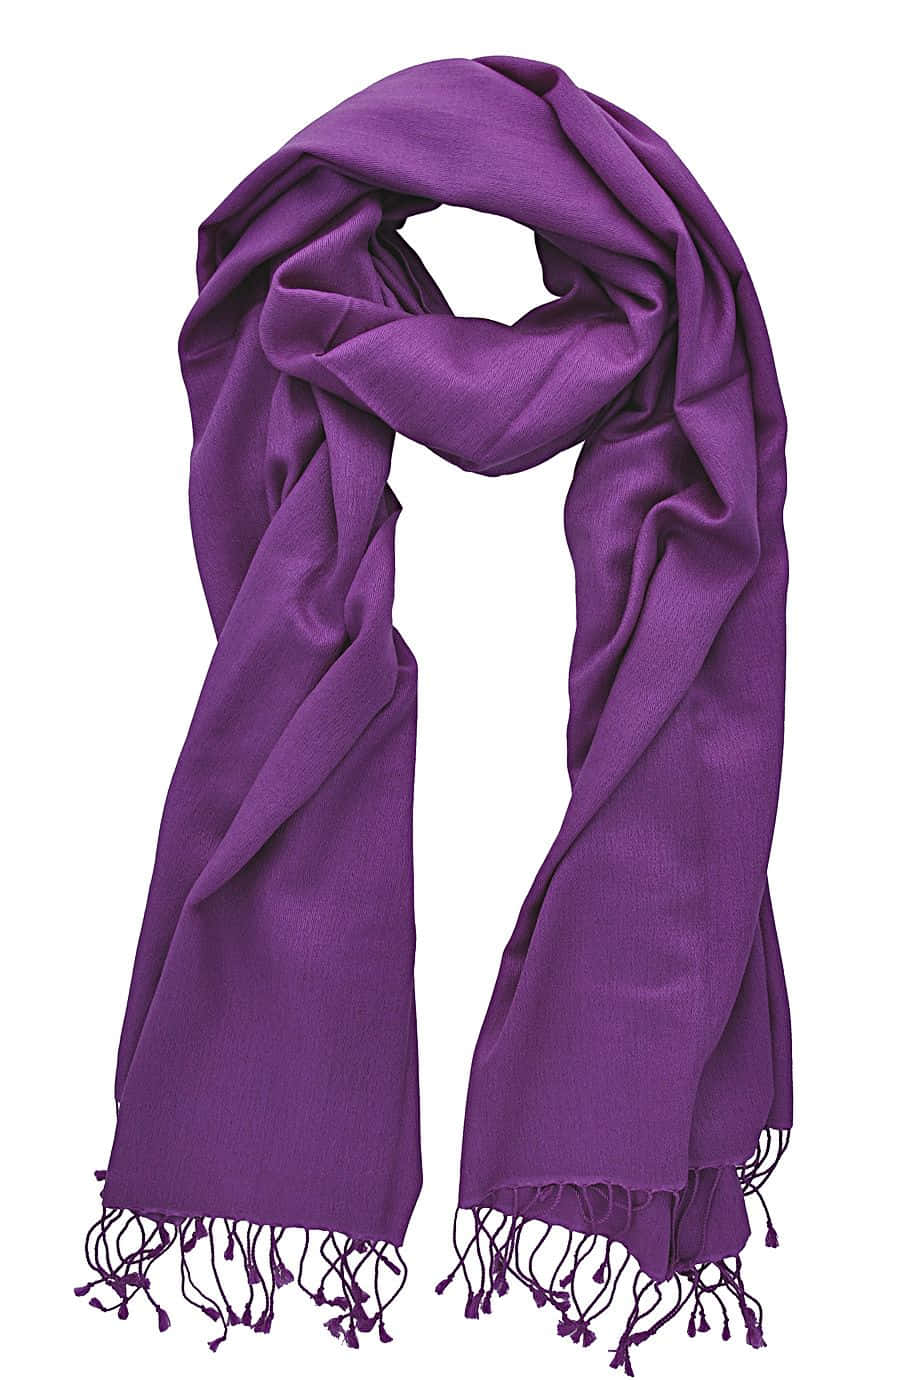 It's time to upgrade your style with this classic purple scarf!" Wallpaper